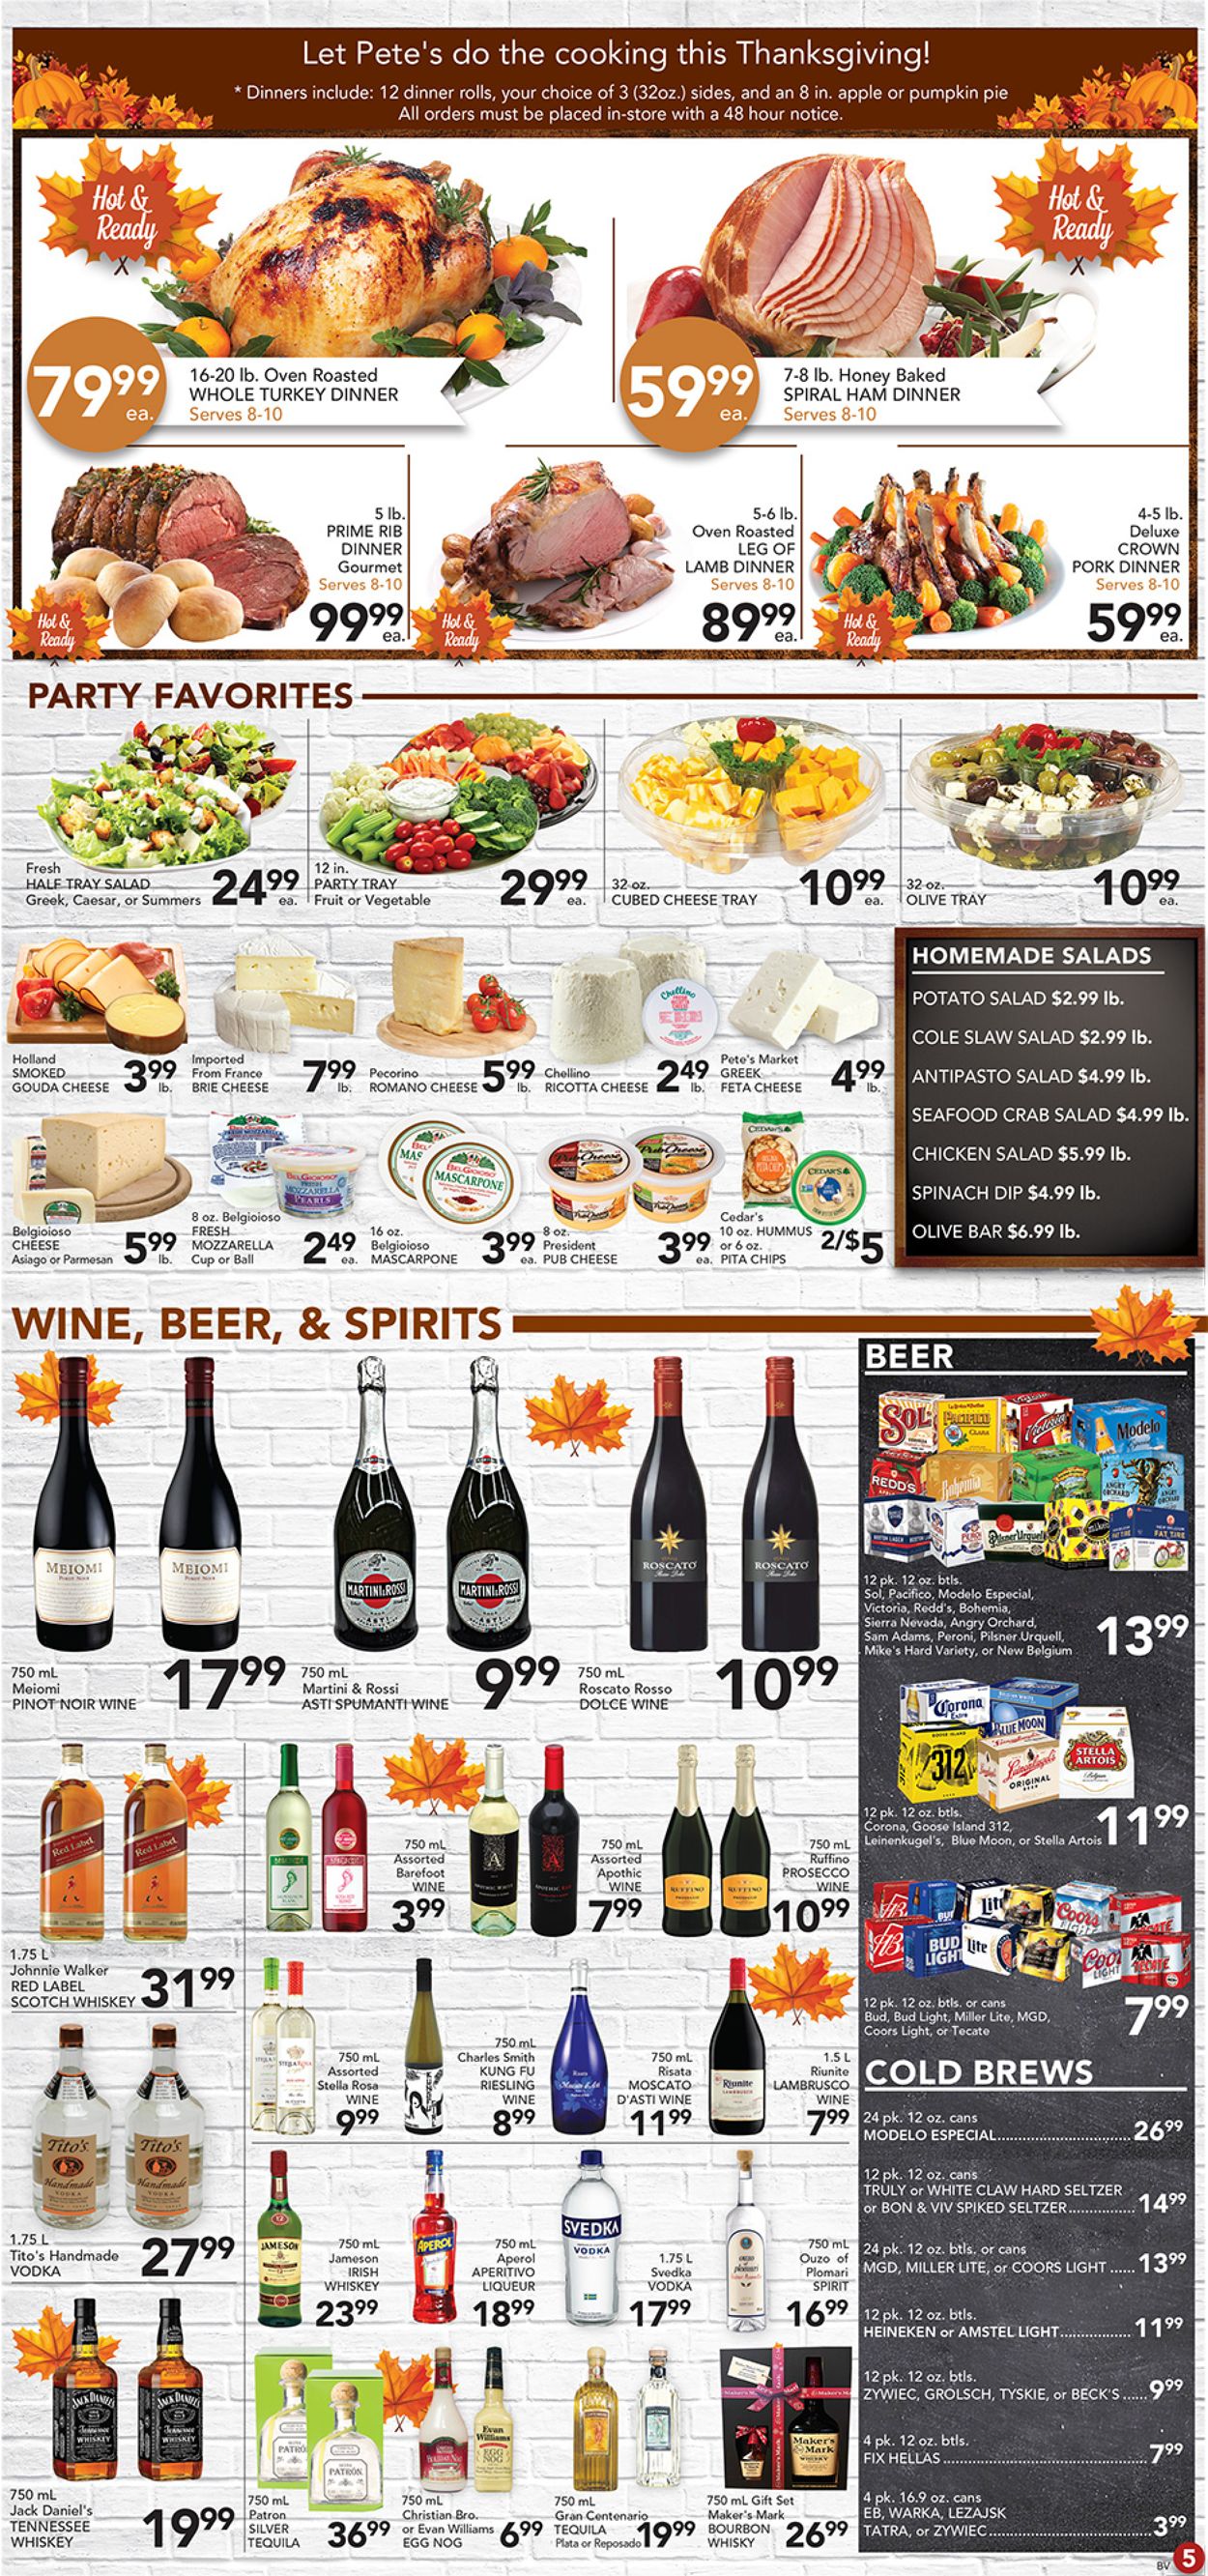 Pete's Fresh Market - Thanksgiving Ad 2019 Weekly Ad Circular - valid 11/20-11/28/2019 (Page 5)